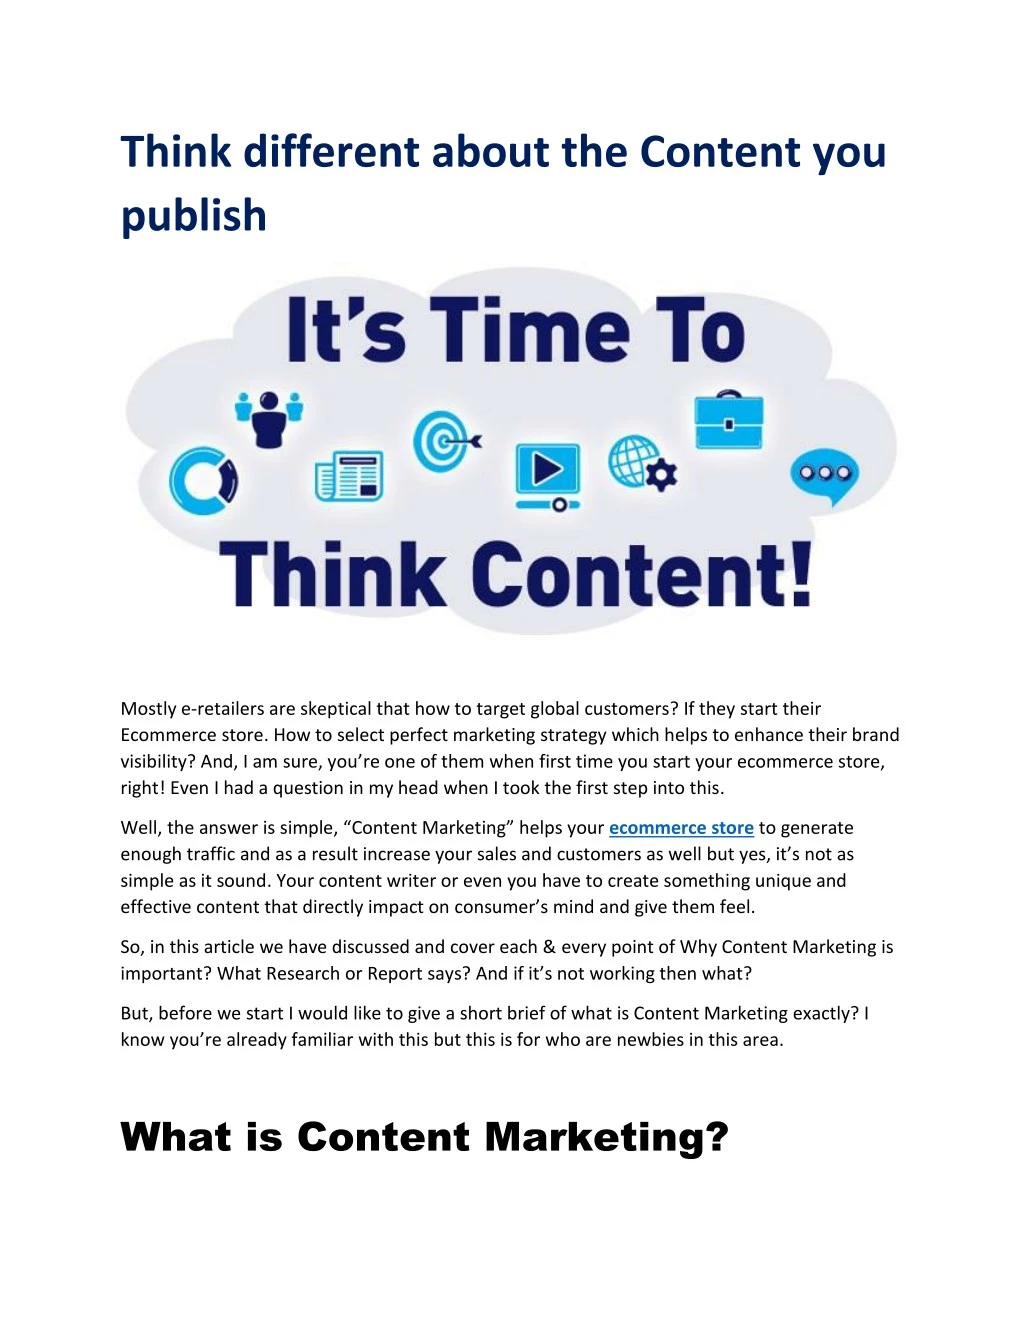 think different about the content you publish